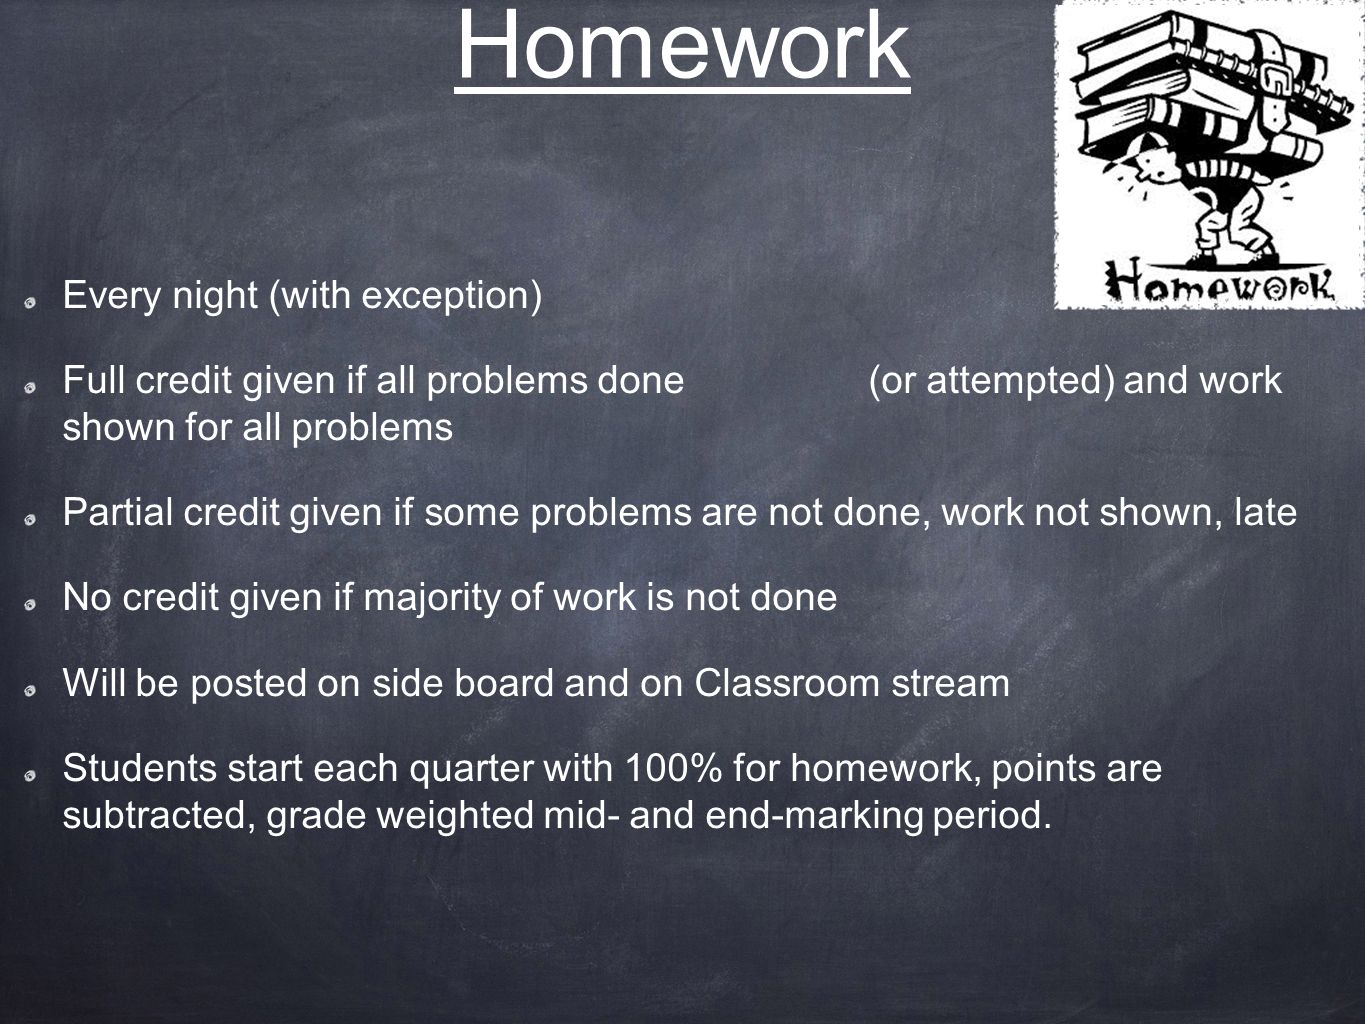 Homework Every night (with exception) Full credit given if all problems done (or attempted) and work shown for all problems Partial credit given if some problems are not done, work not shown, late No credit given if majority of work is not done Will be posted on side board and on Classroom stream Students start each quarter with 100% for homework, points are subtracted, grade weighted mid- and end-marking period.